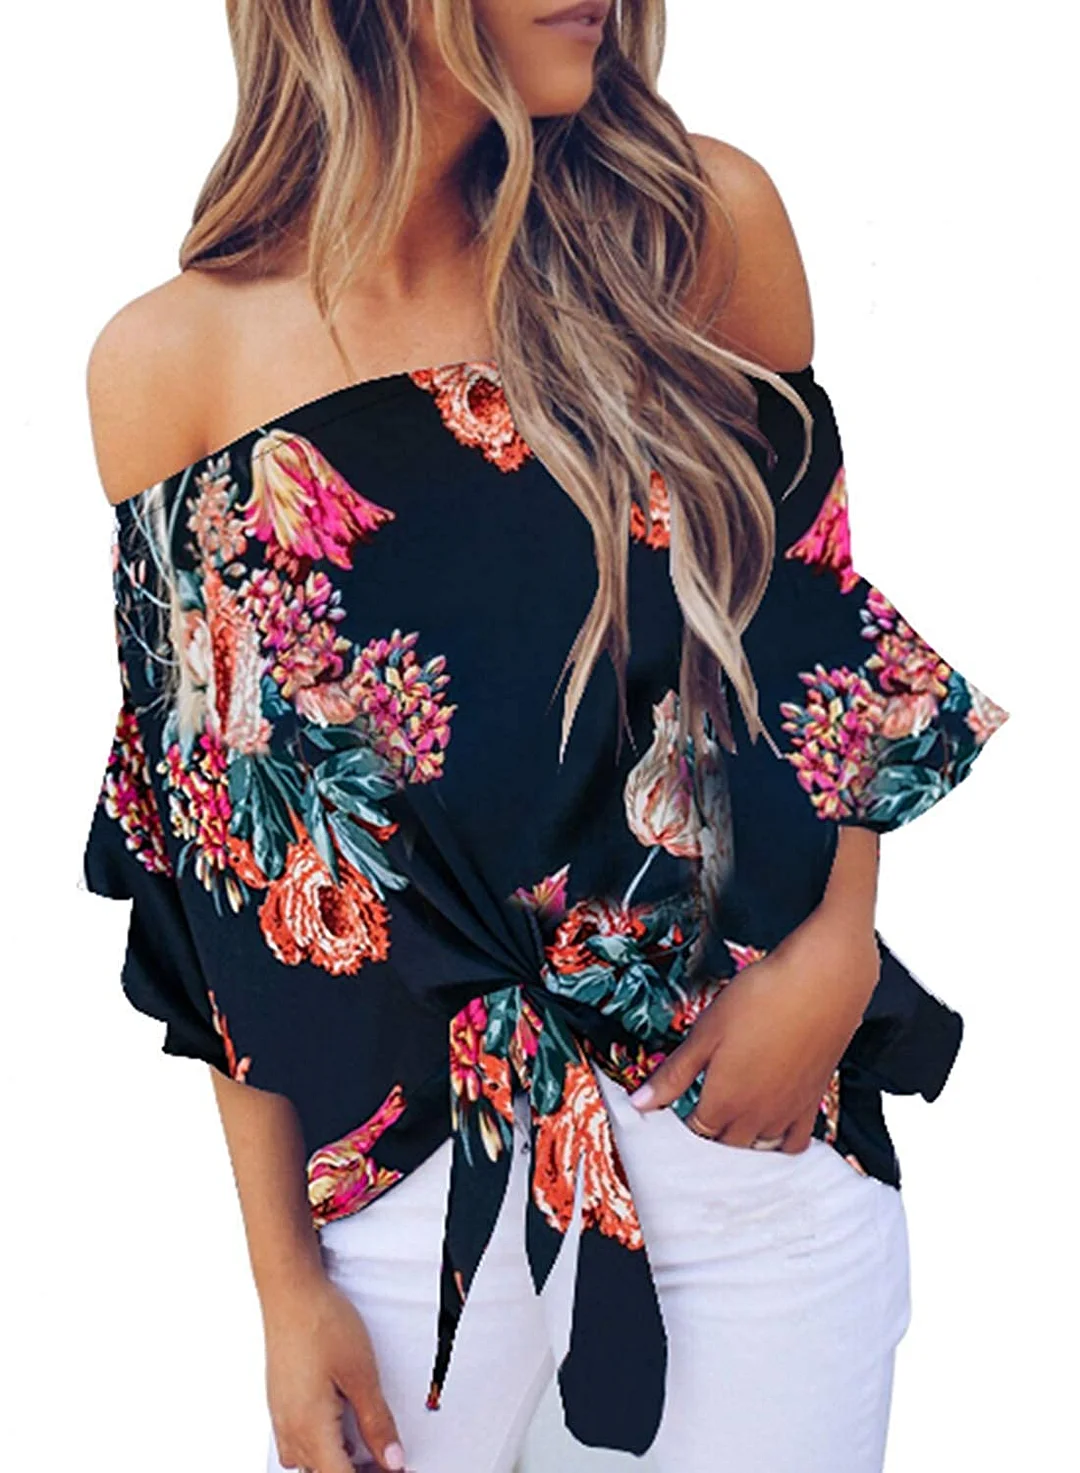 Womens Summer Off The Shoulder Tops 3/4 Bell Sleeves Sexy Floral Tie Knot T-Shirt Blouse